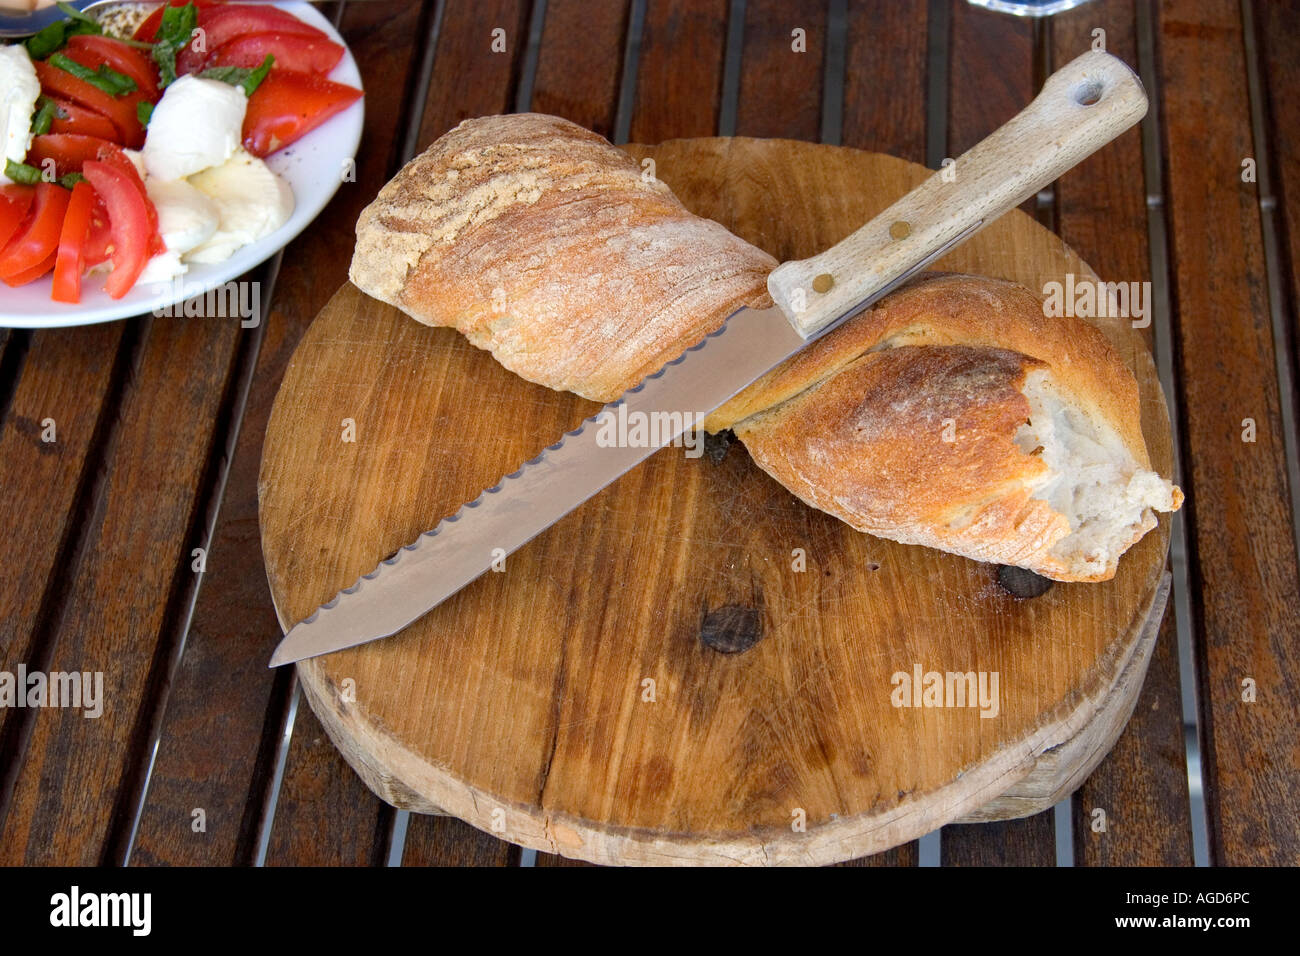 Bread and knife along with light lunch in Switzerland. Stock Photo